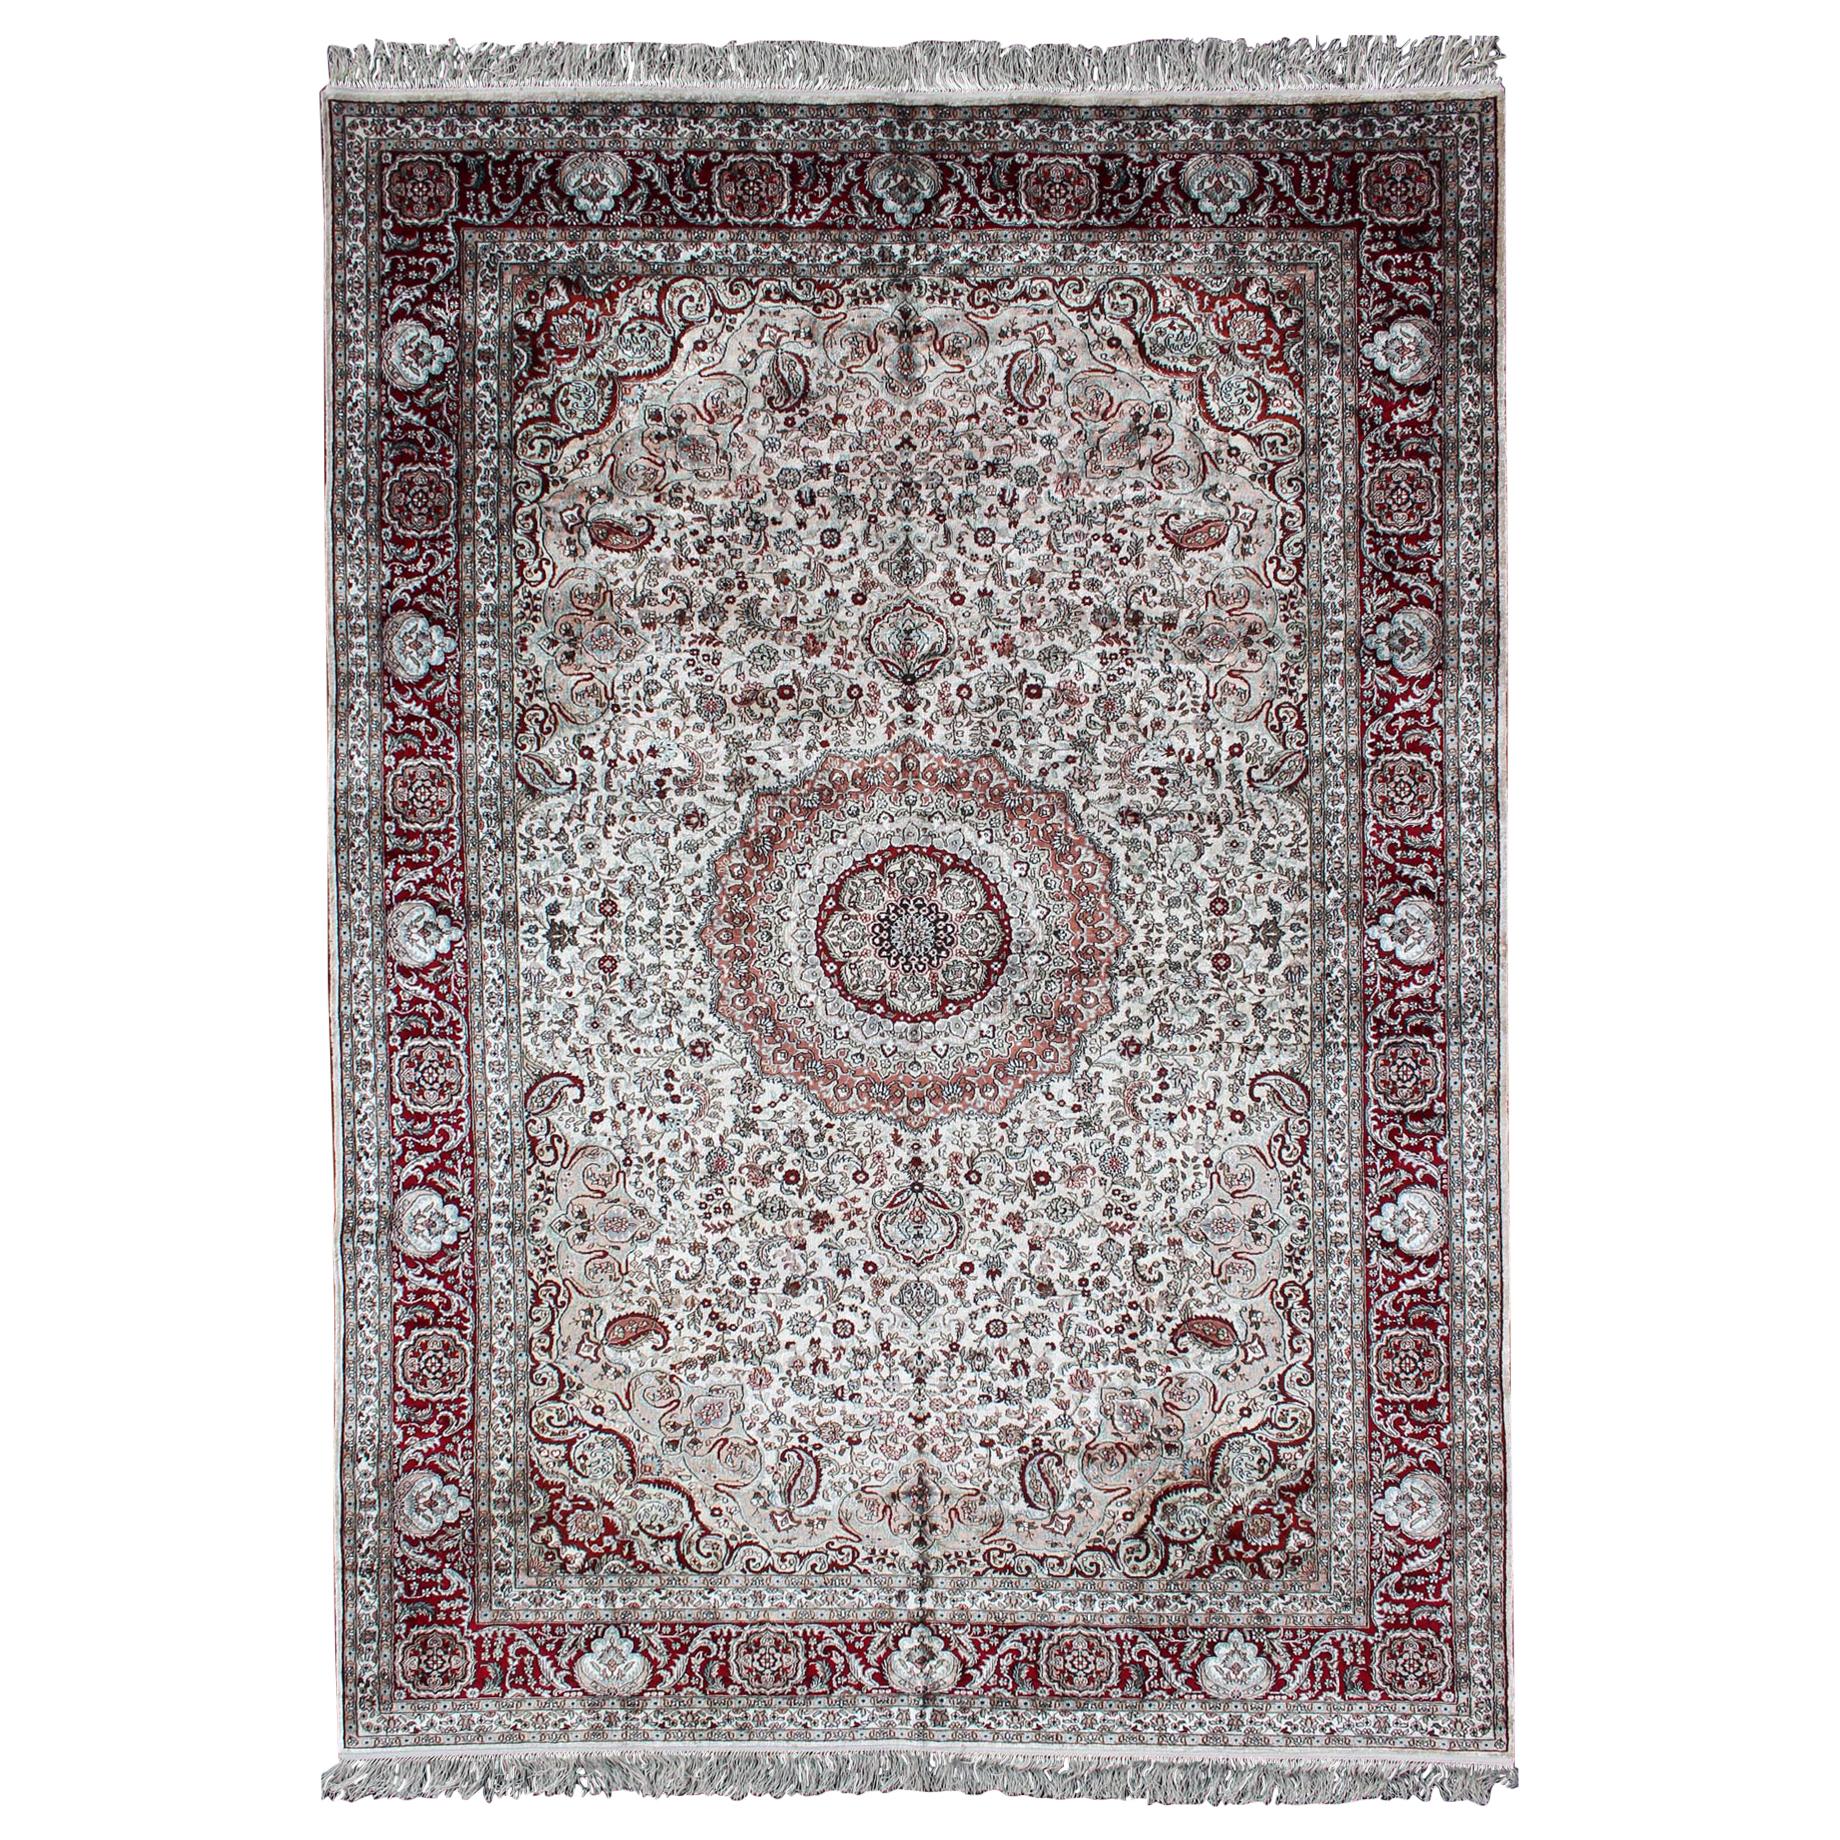 Silk Vintage Isfahan Design Medallion Carpet with Intricate Floral Elements For Sale